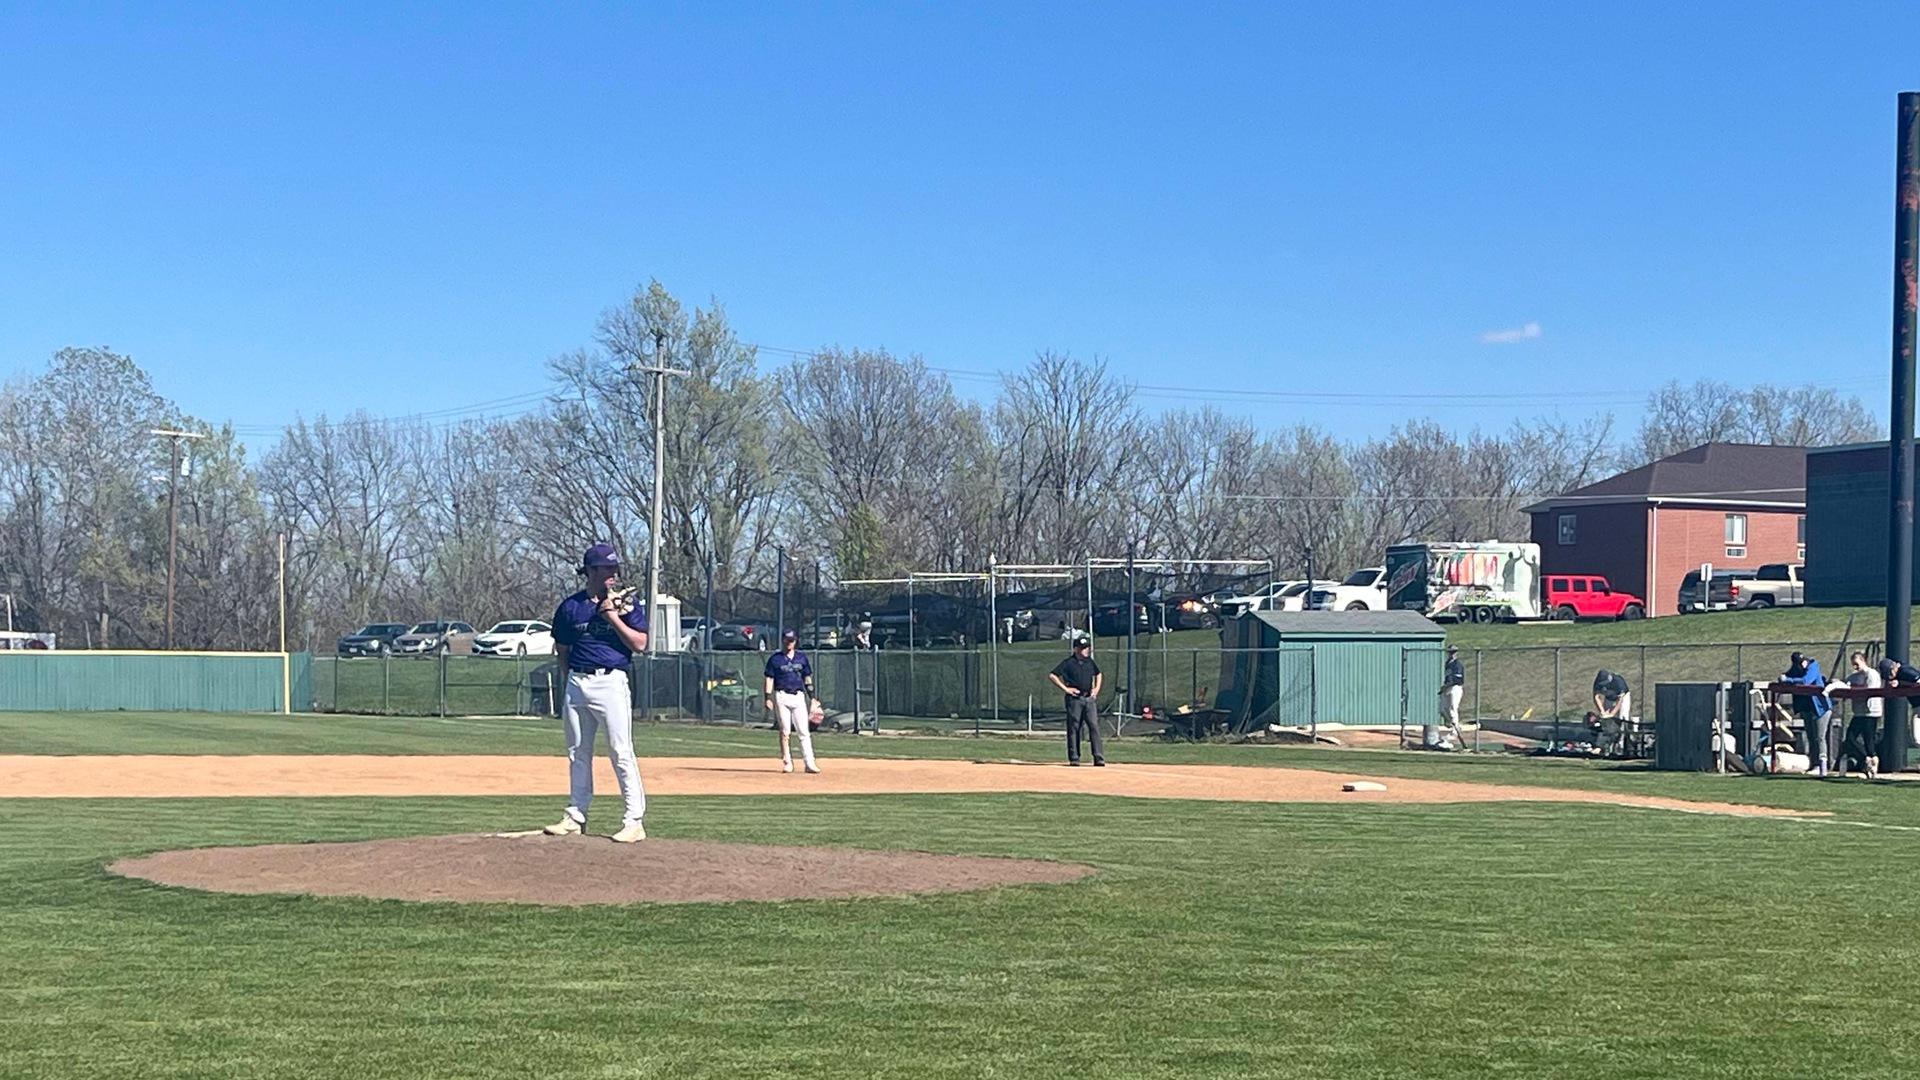 Eutectics Rout Trojans in First of Three-Game Series in Hannibal